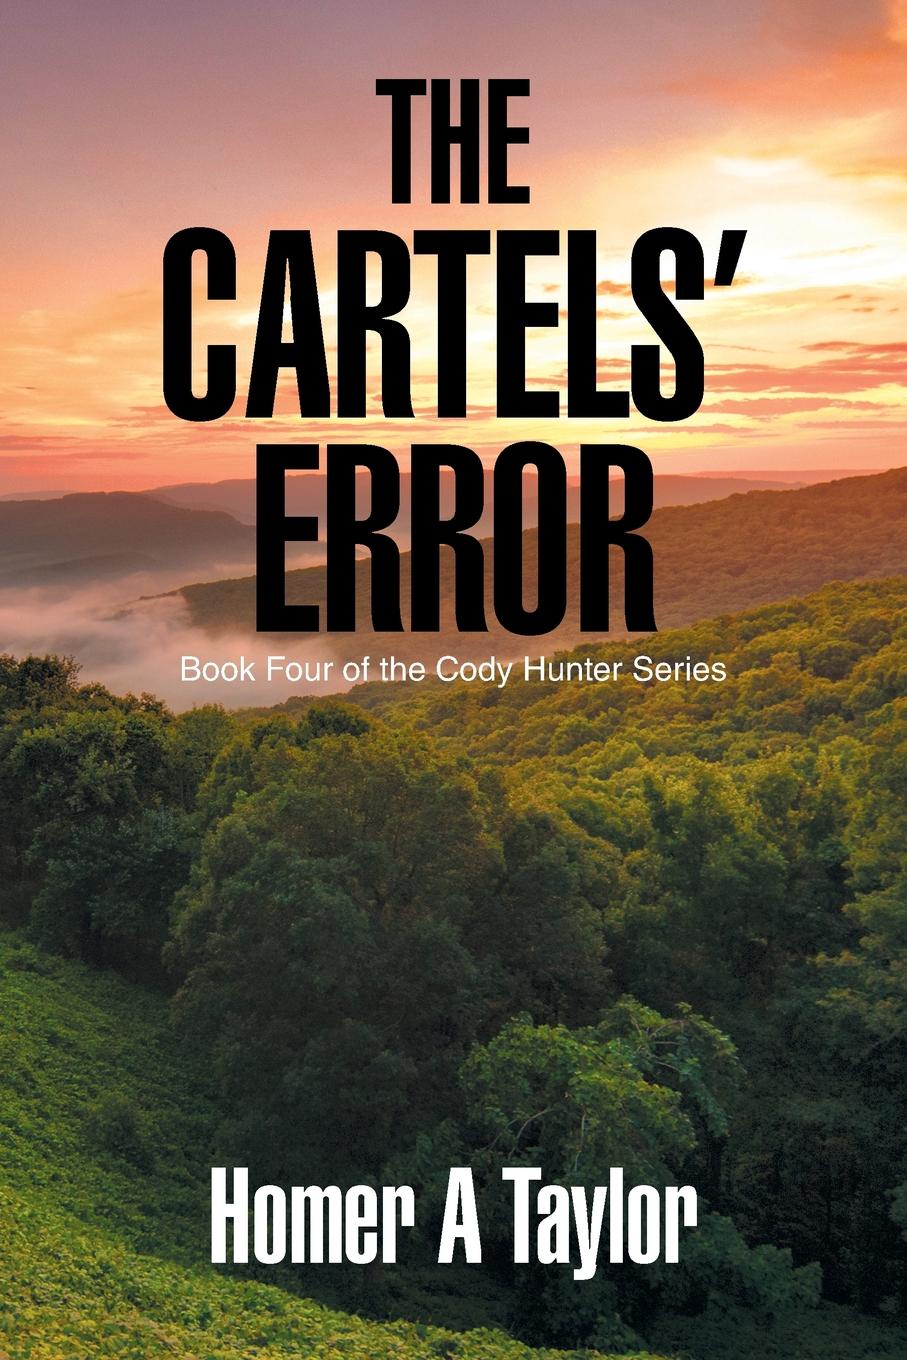 The Cartels. Error. Book Four of the Cody Hunter Series